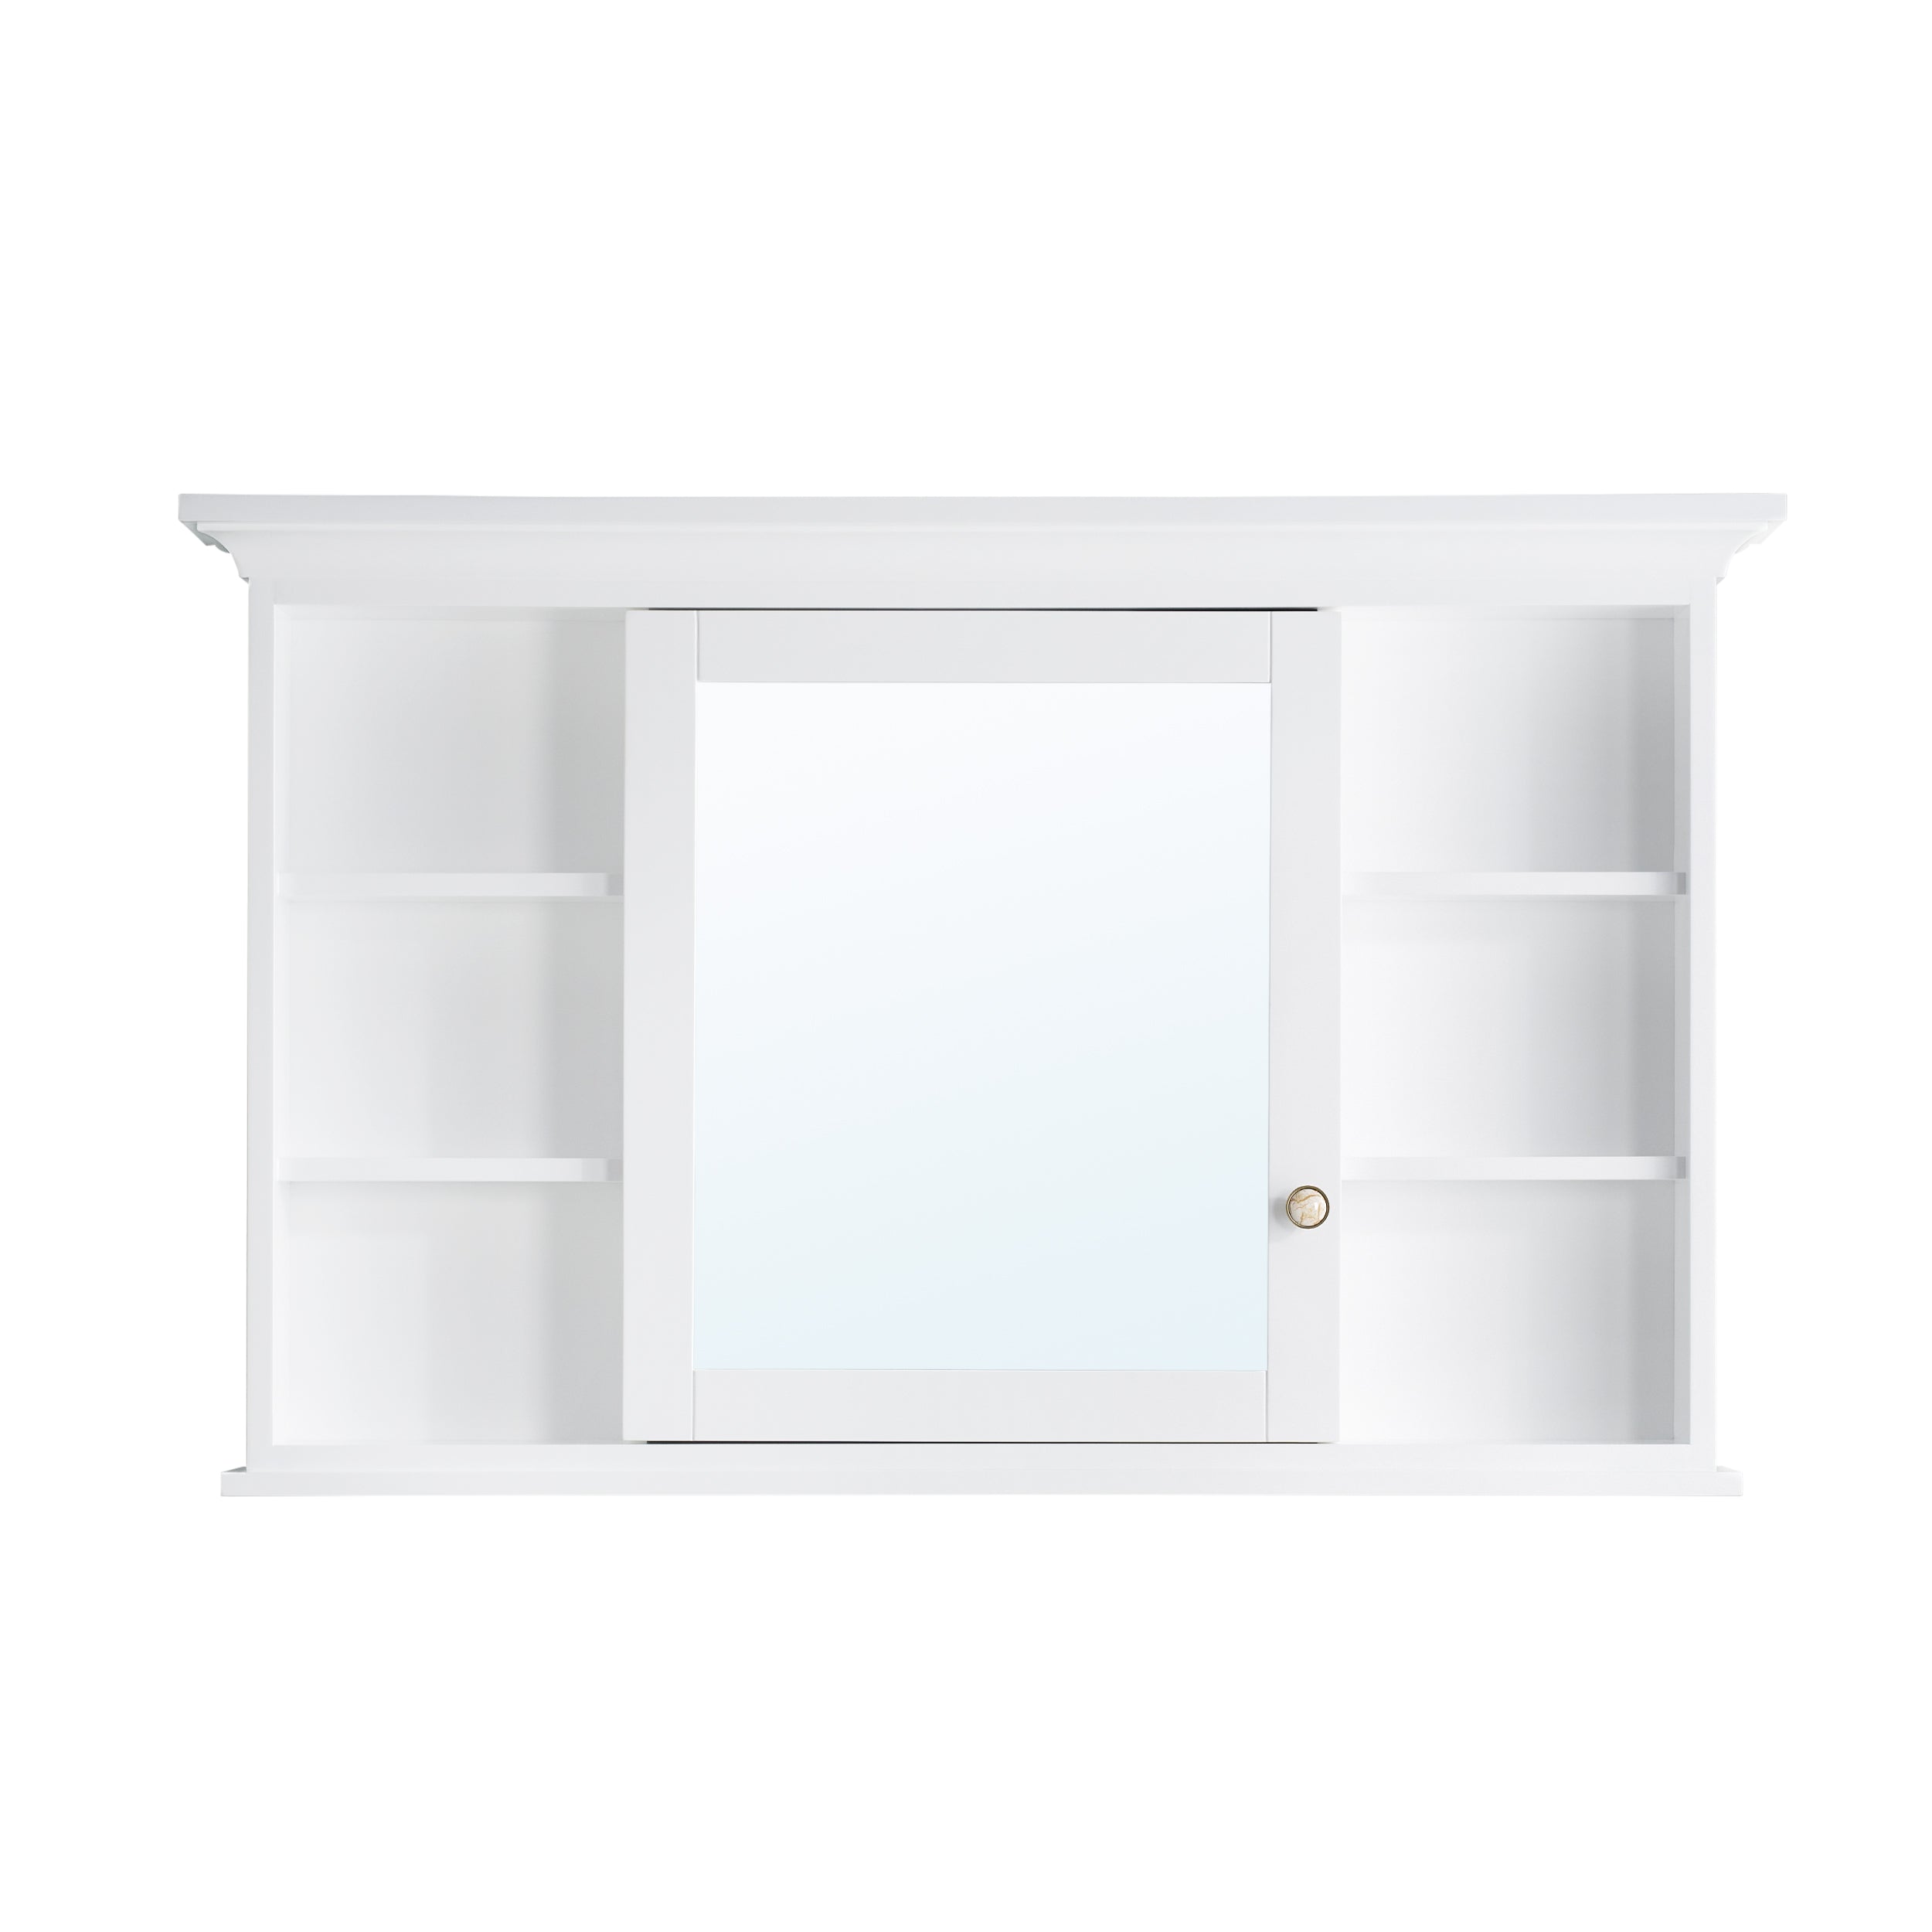 48 in.W x 30 in.H Surface-Mount Bathroom Medicine Cabinet with Mirror in White